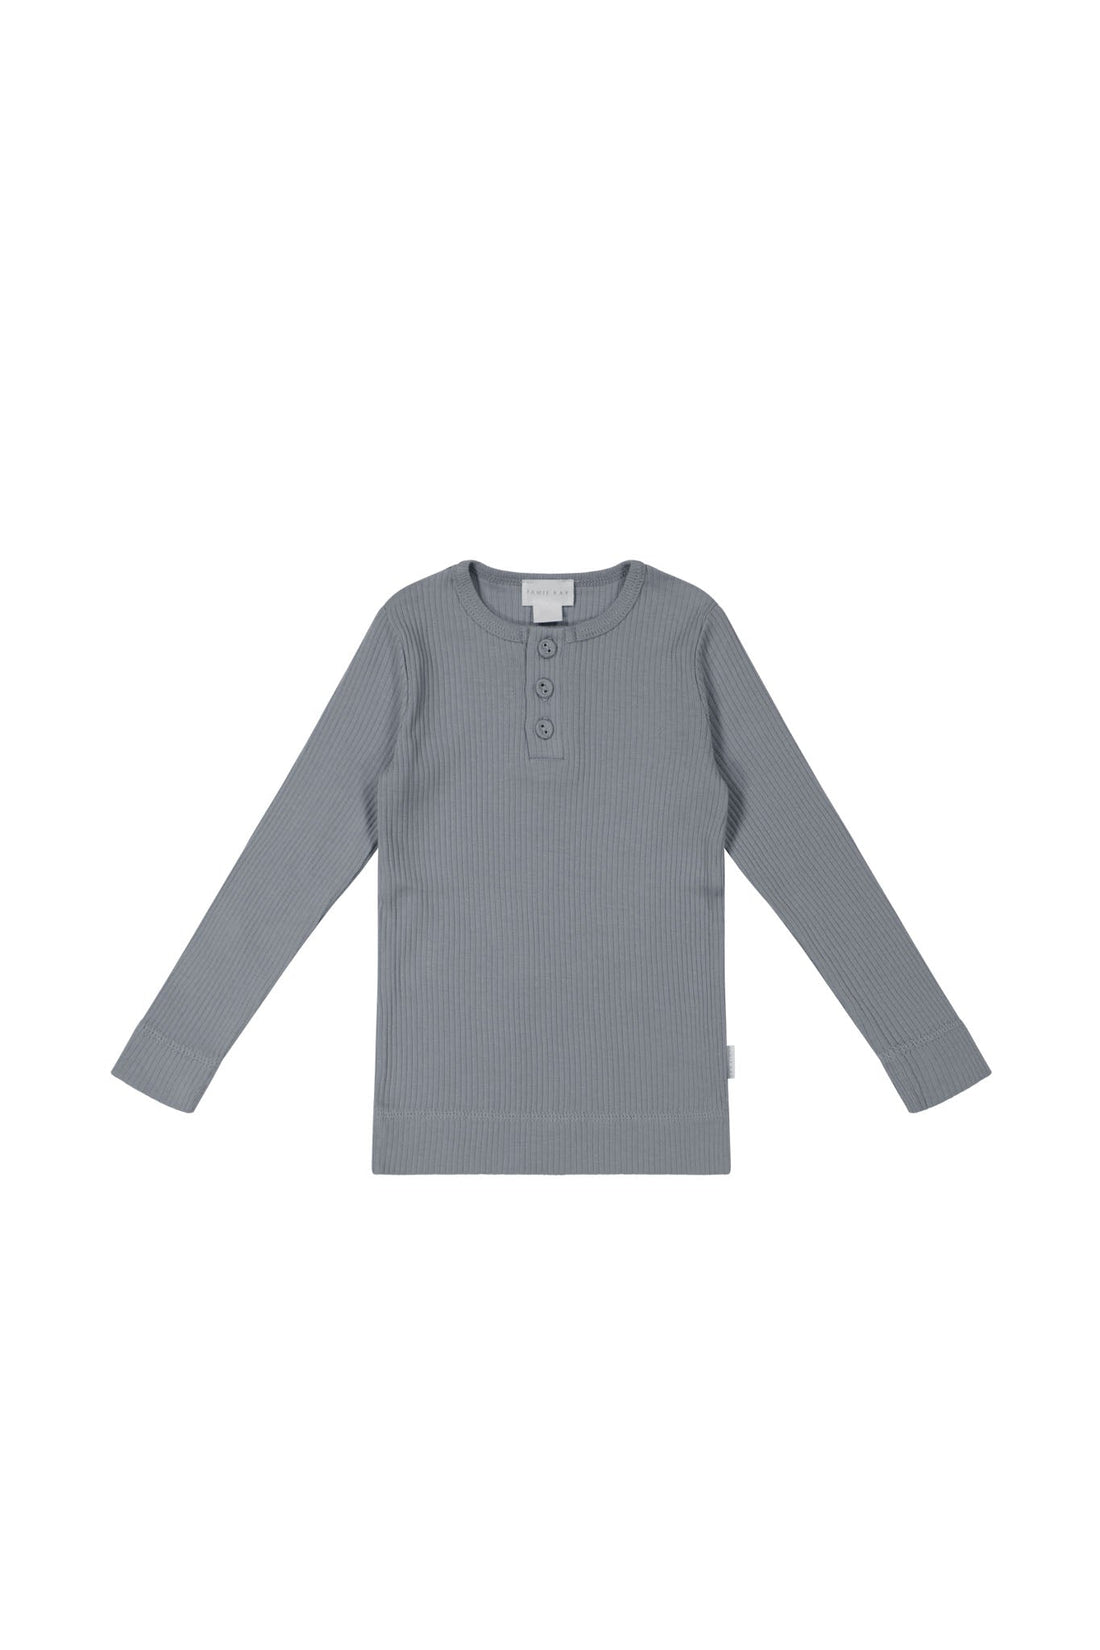 Organic Cotton Modal Long Sleeve Henley - Finch Childrens Top from Jamie Kay USA